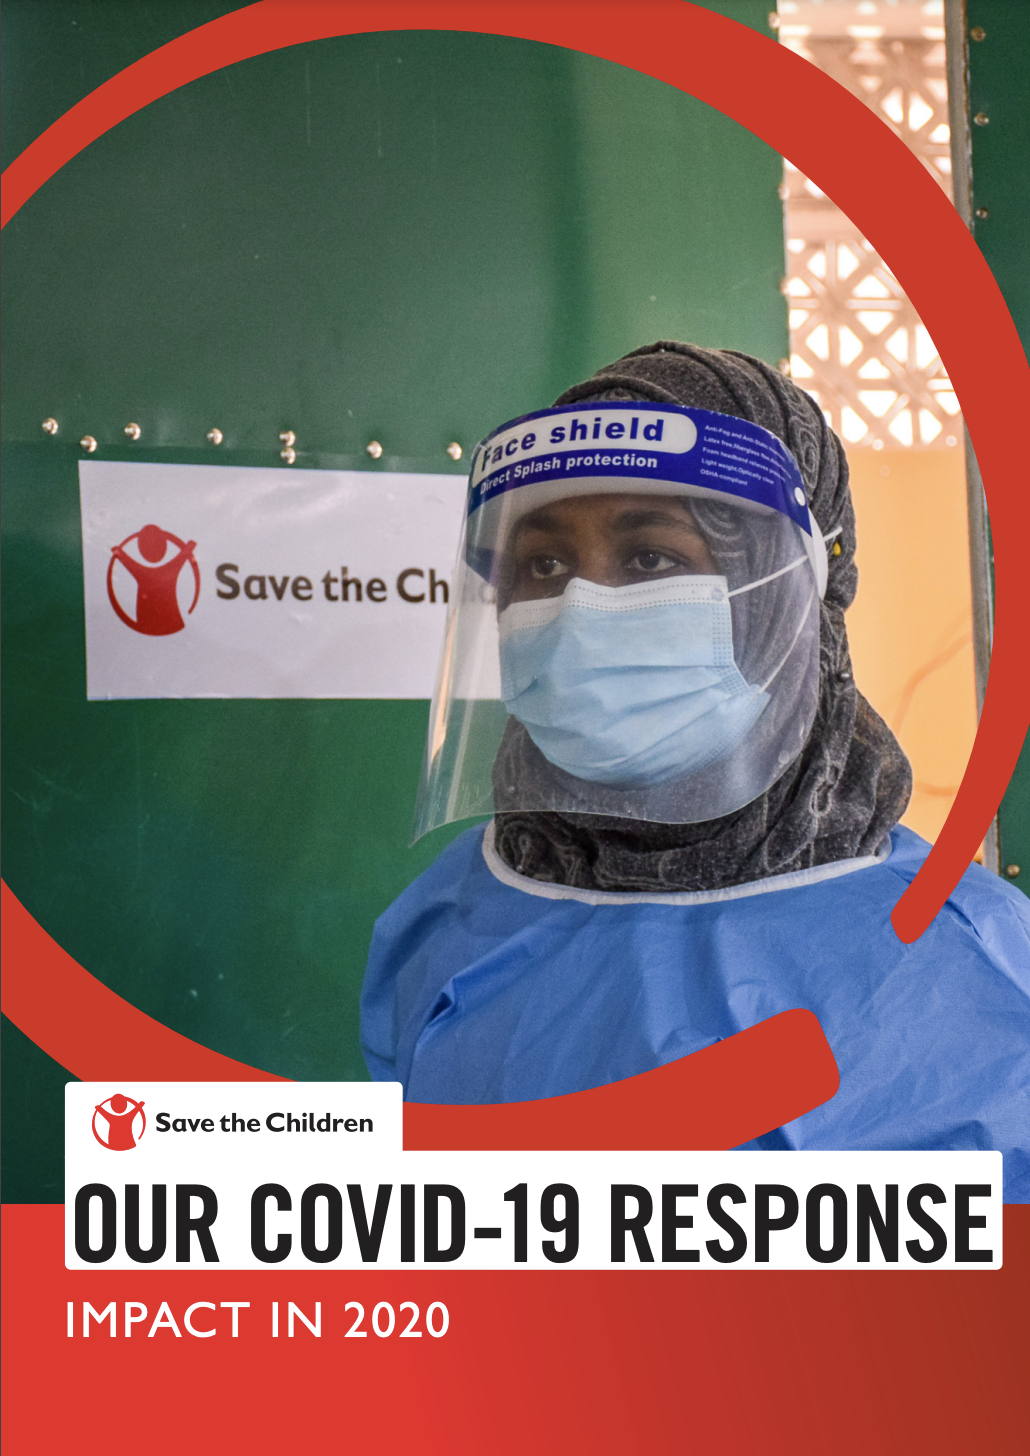 Save the Children’s COVID-19 Response: Our impact in 2020